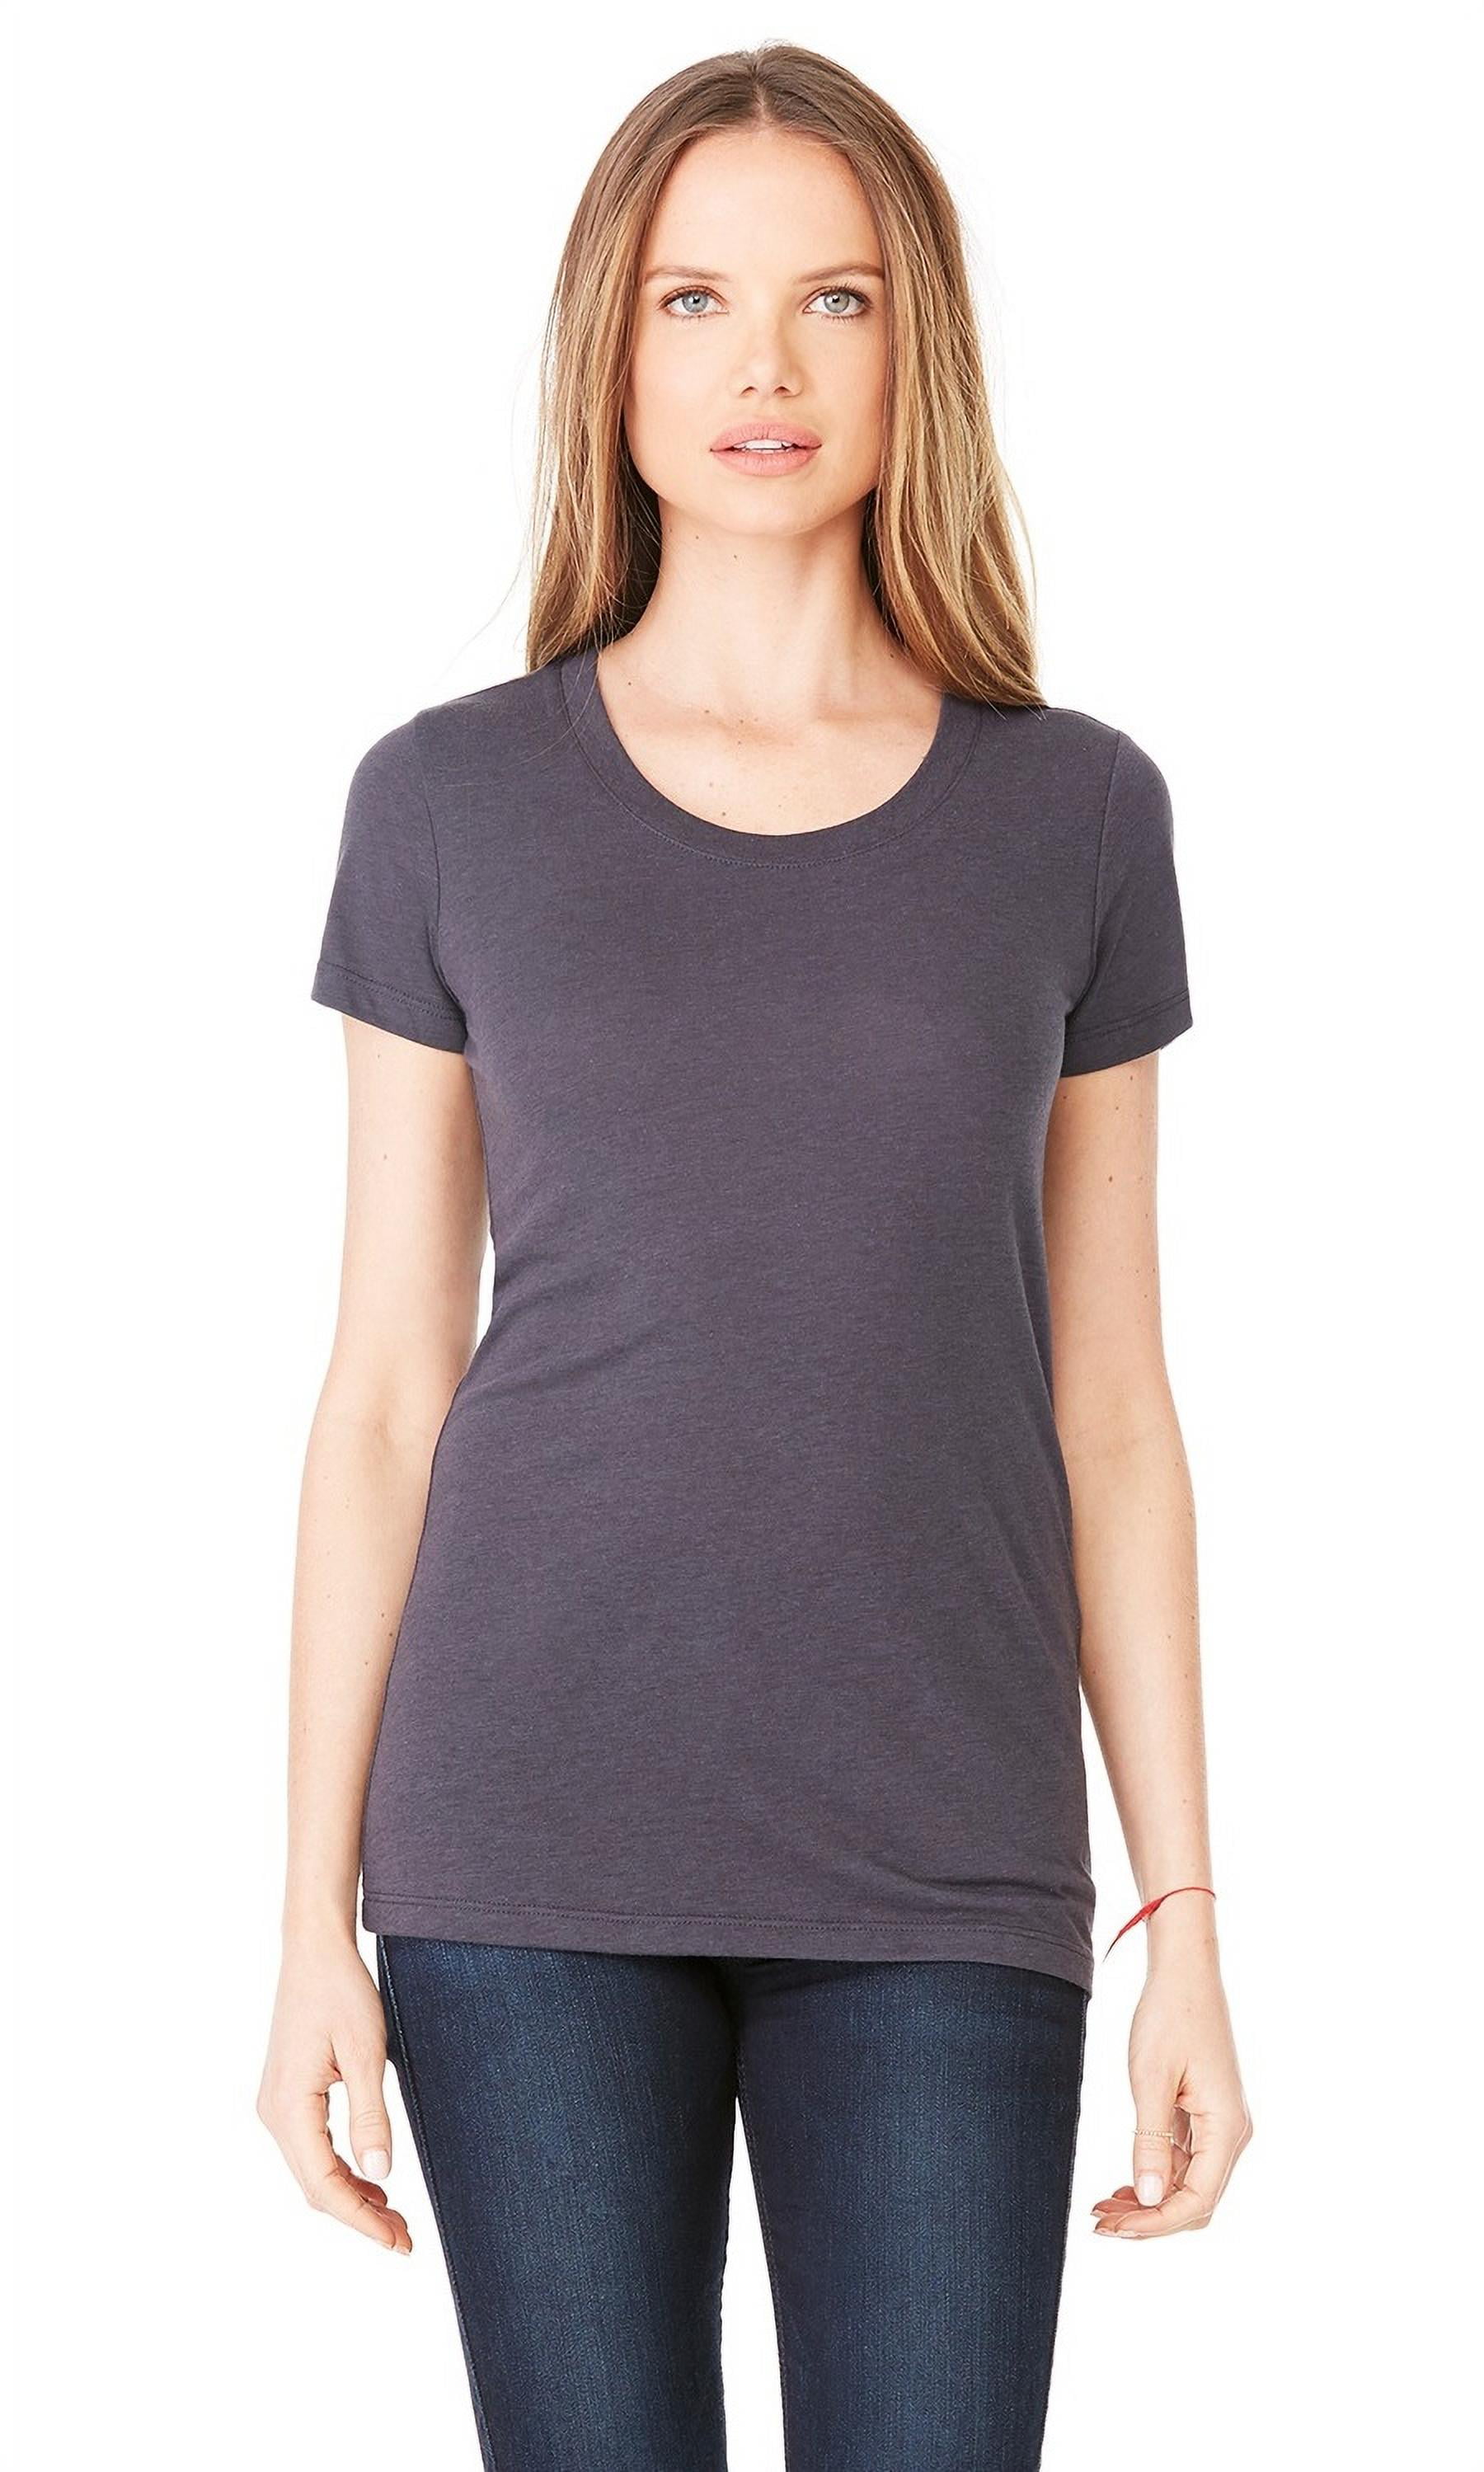 The Bella + Canvas Ladies Triblend Short Sleeve T-Shirt - SLD DK GRY ...